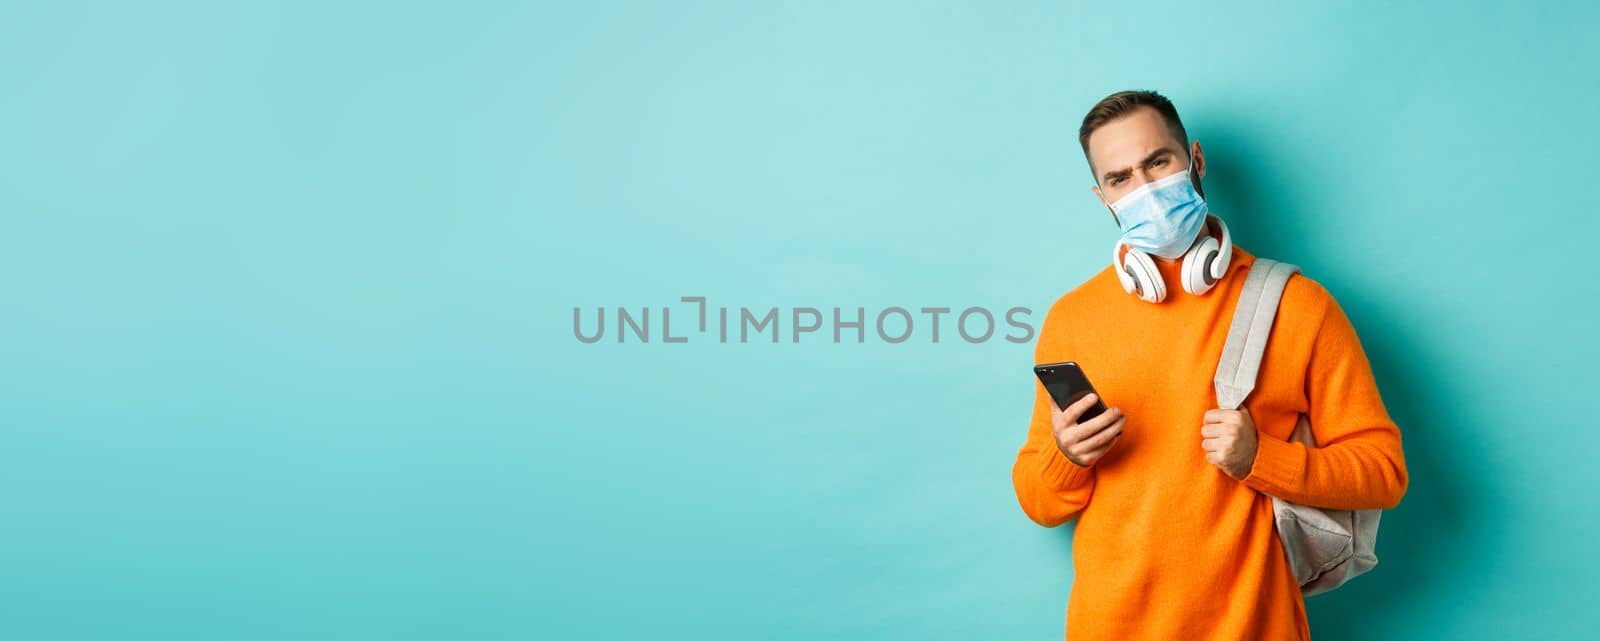 Skeptical and disappointed young man wearing face mask, holding backpack and mobile phone, frowning upset, standing over light blue background.